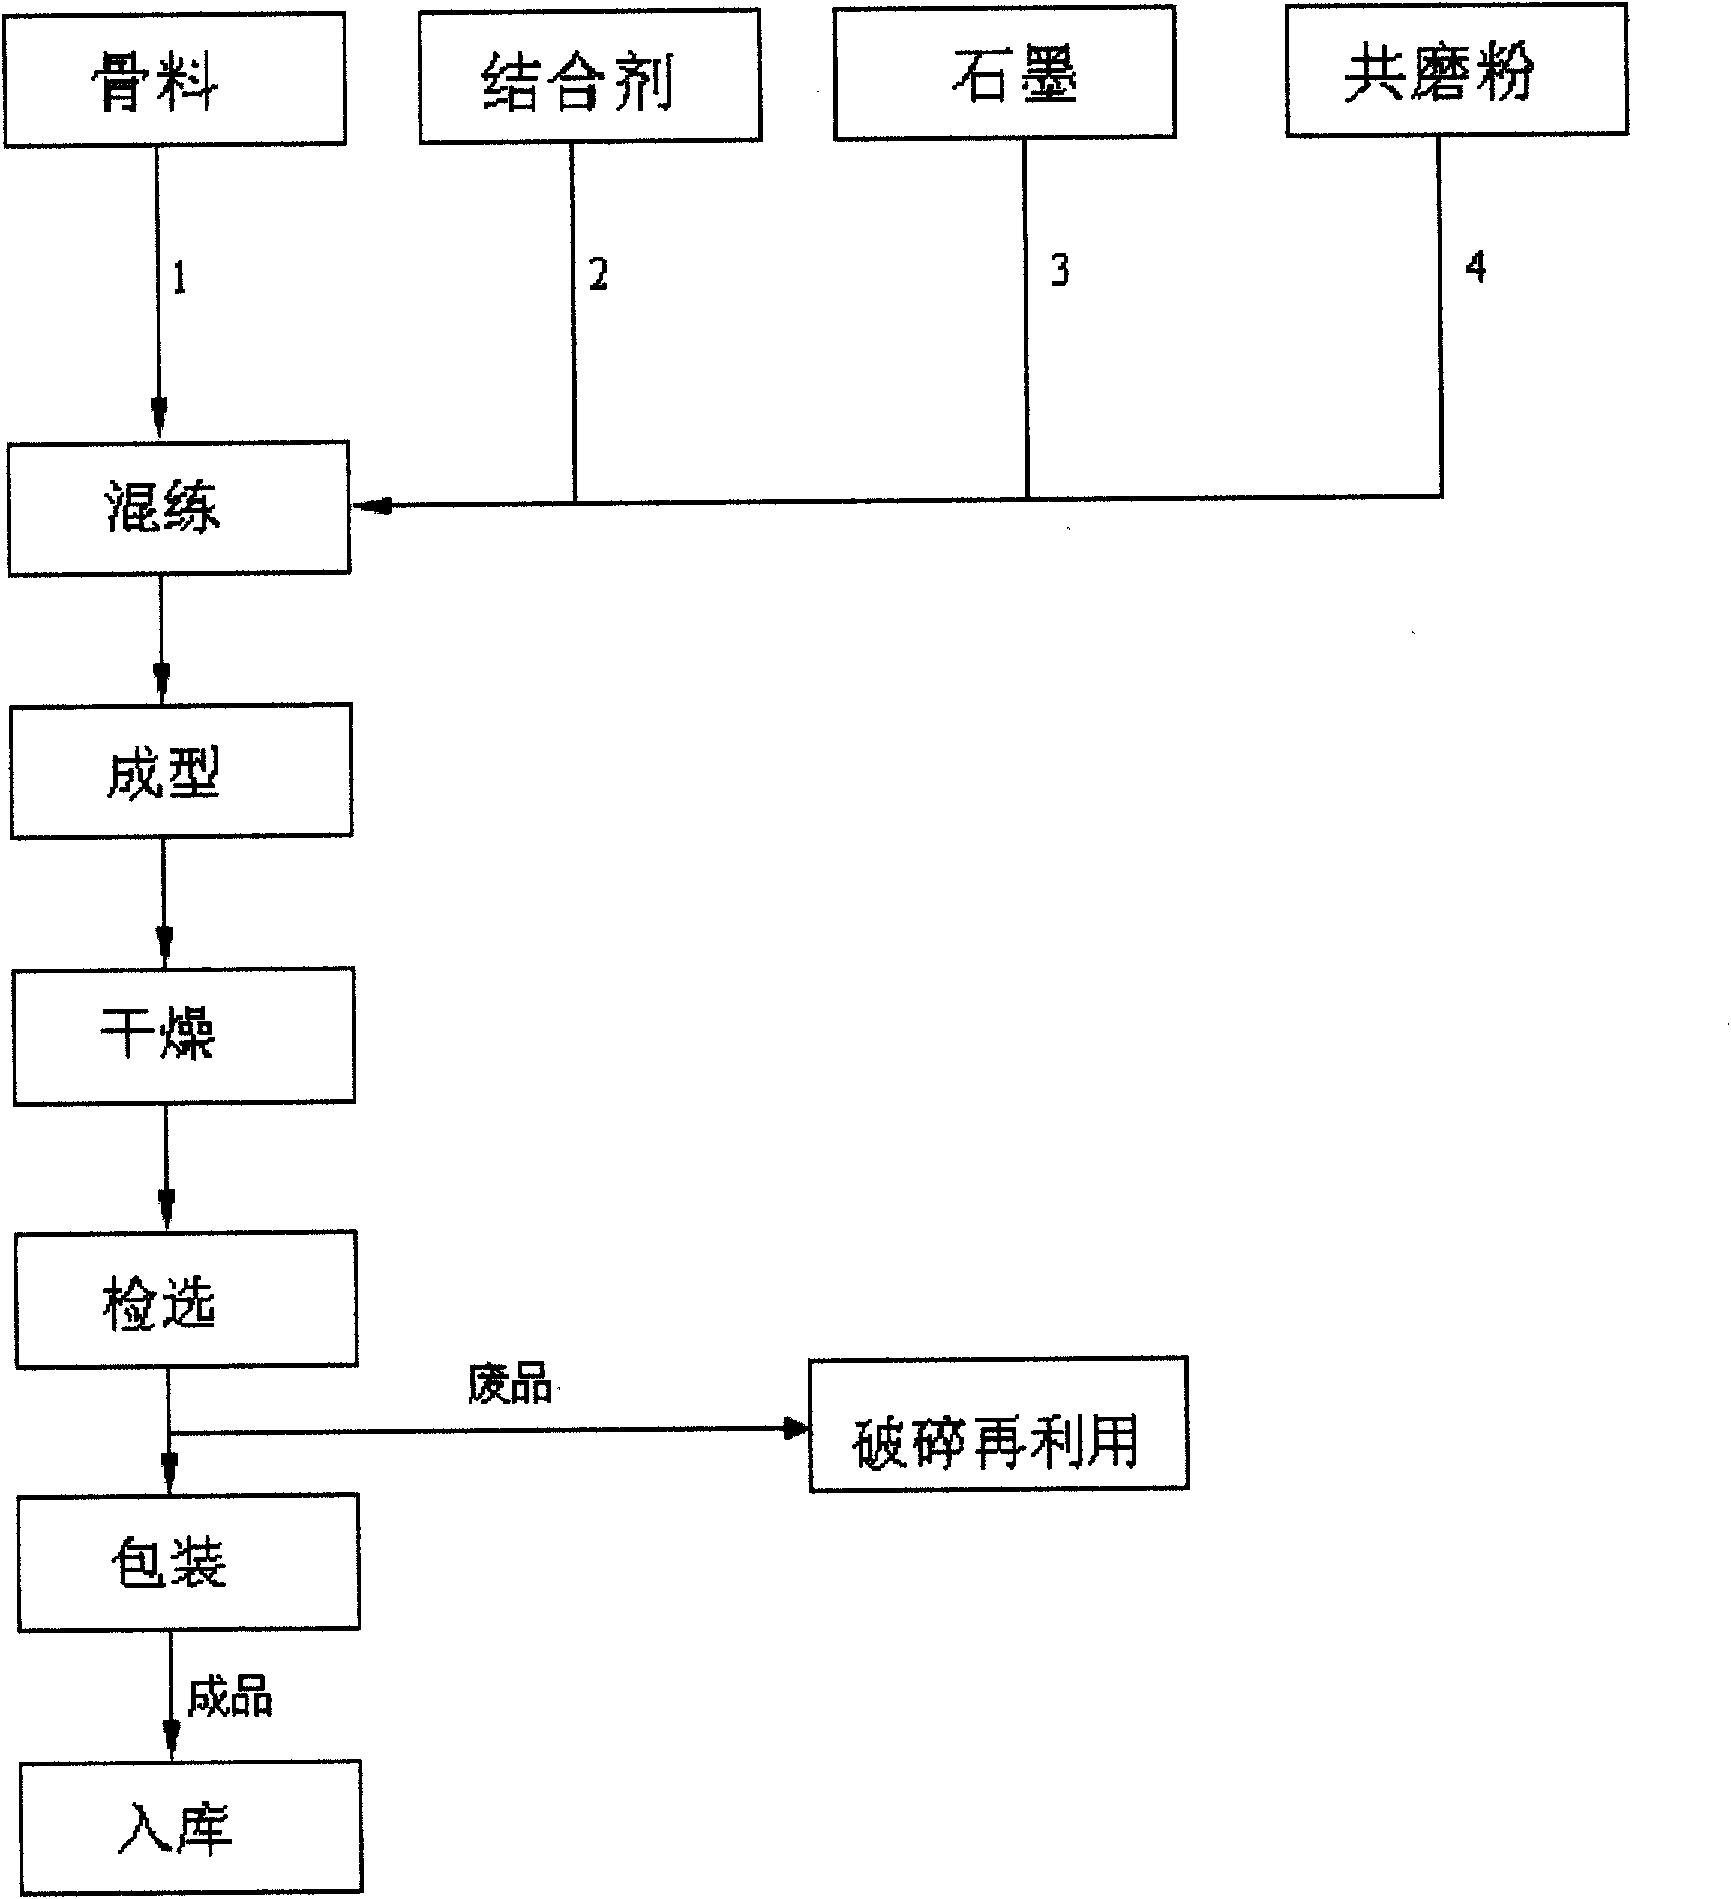 Low-carbon corundum spinelle brick for refined steel ladles and preparation method thereof